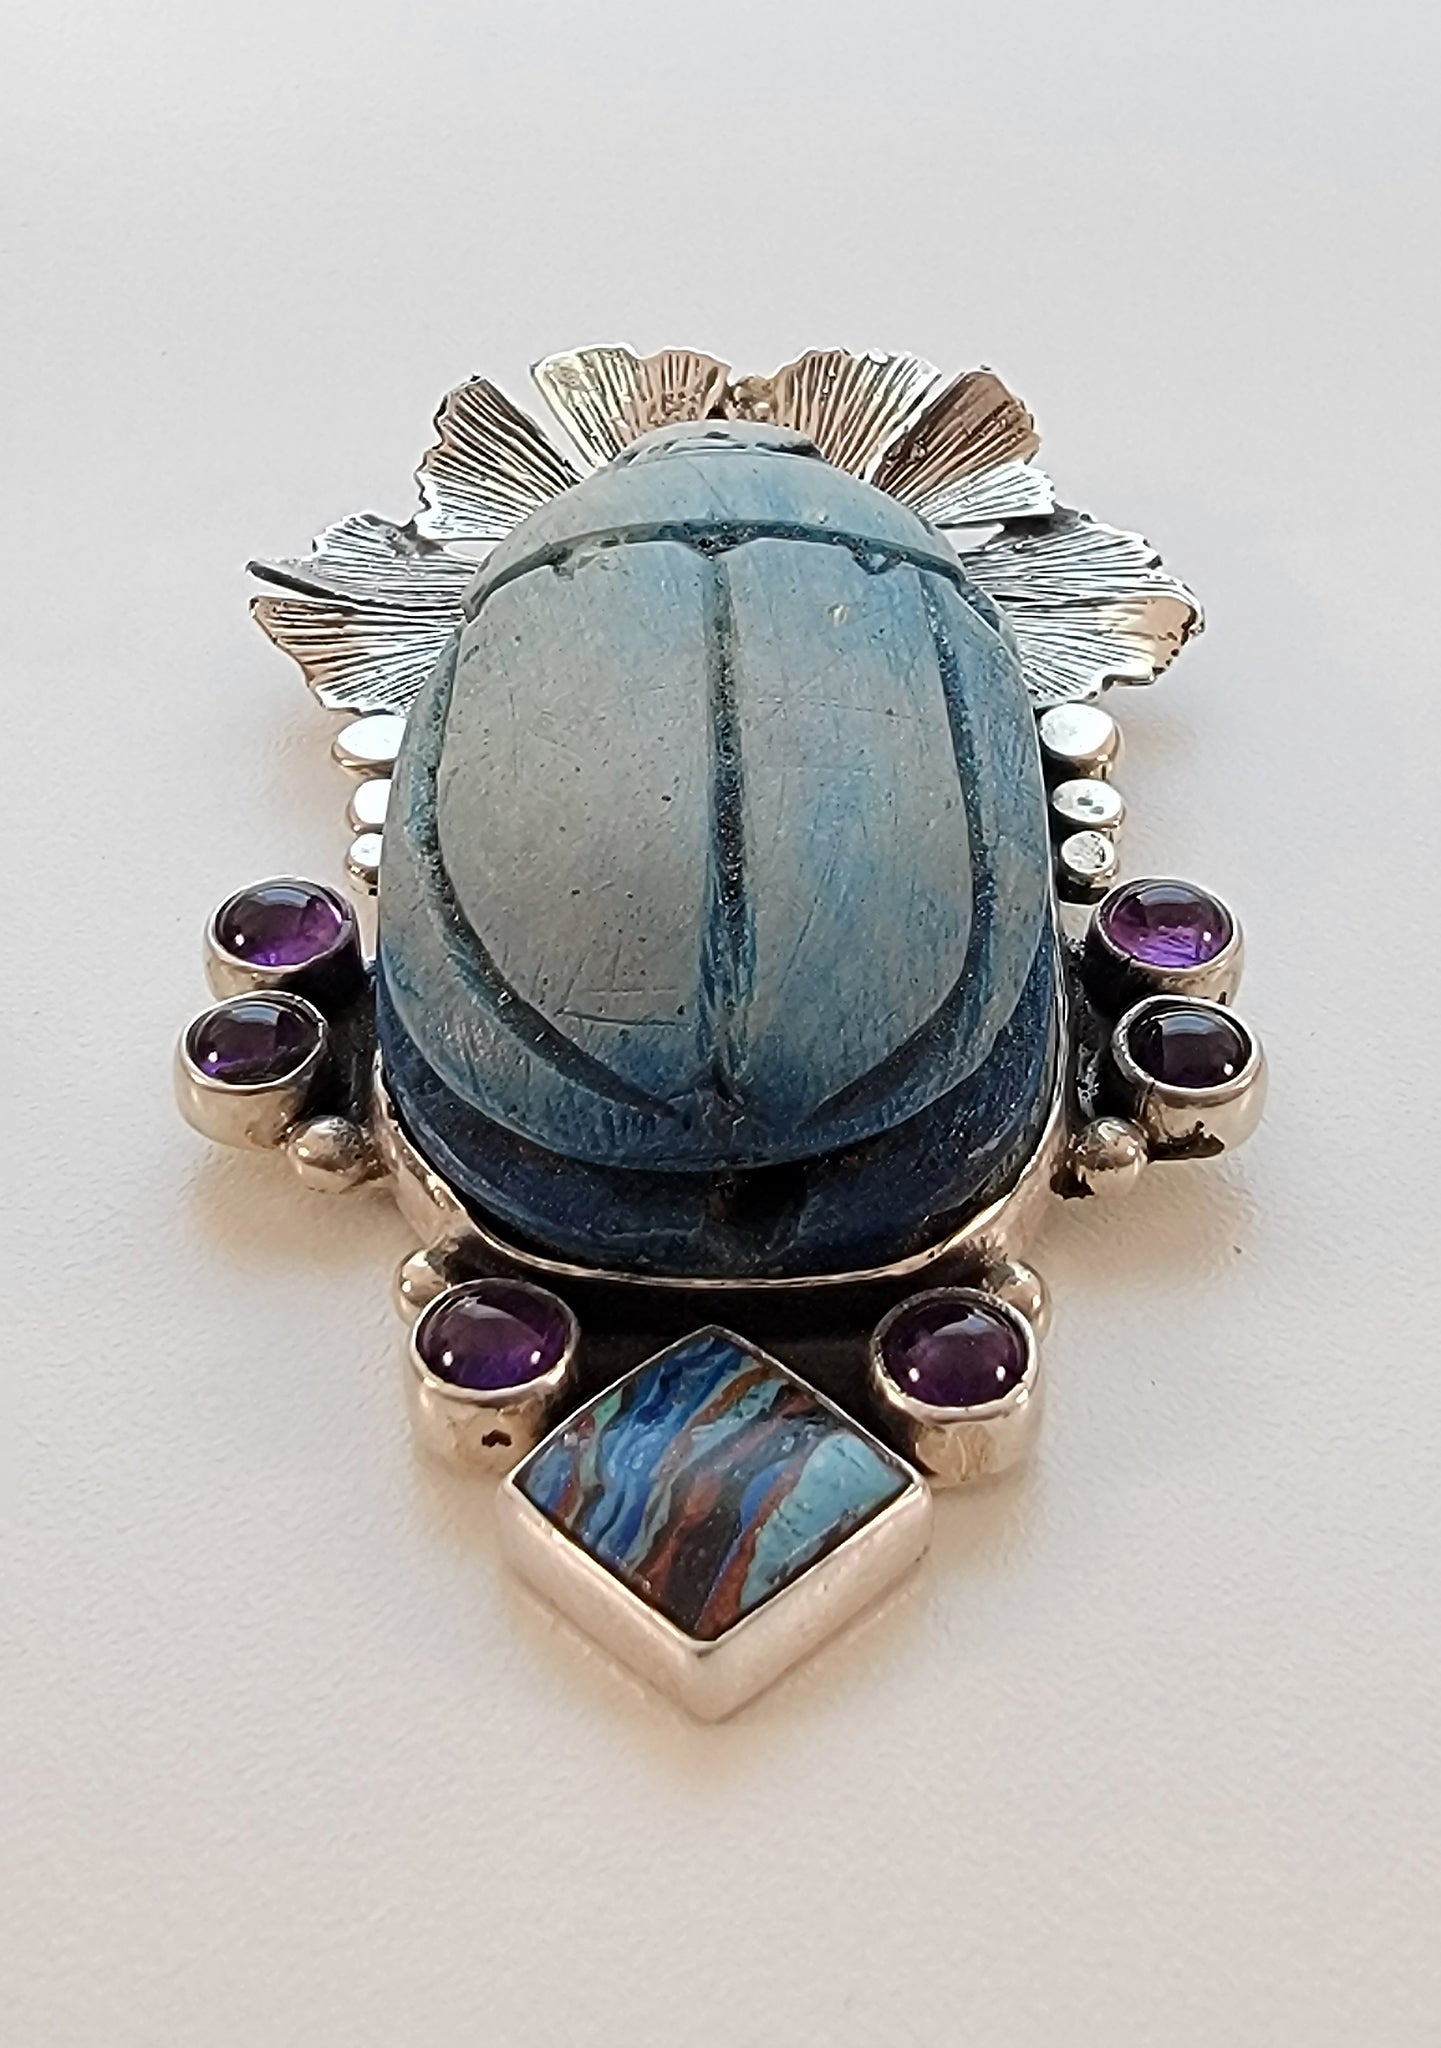 Egyptian Scarab Sterling Silver Pendant with Amethyst &amp; Rainbow Calsilica